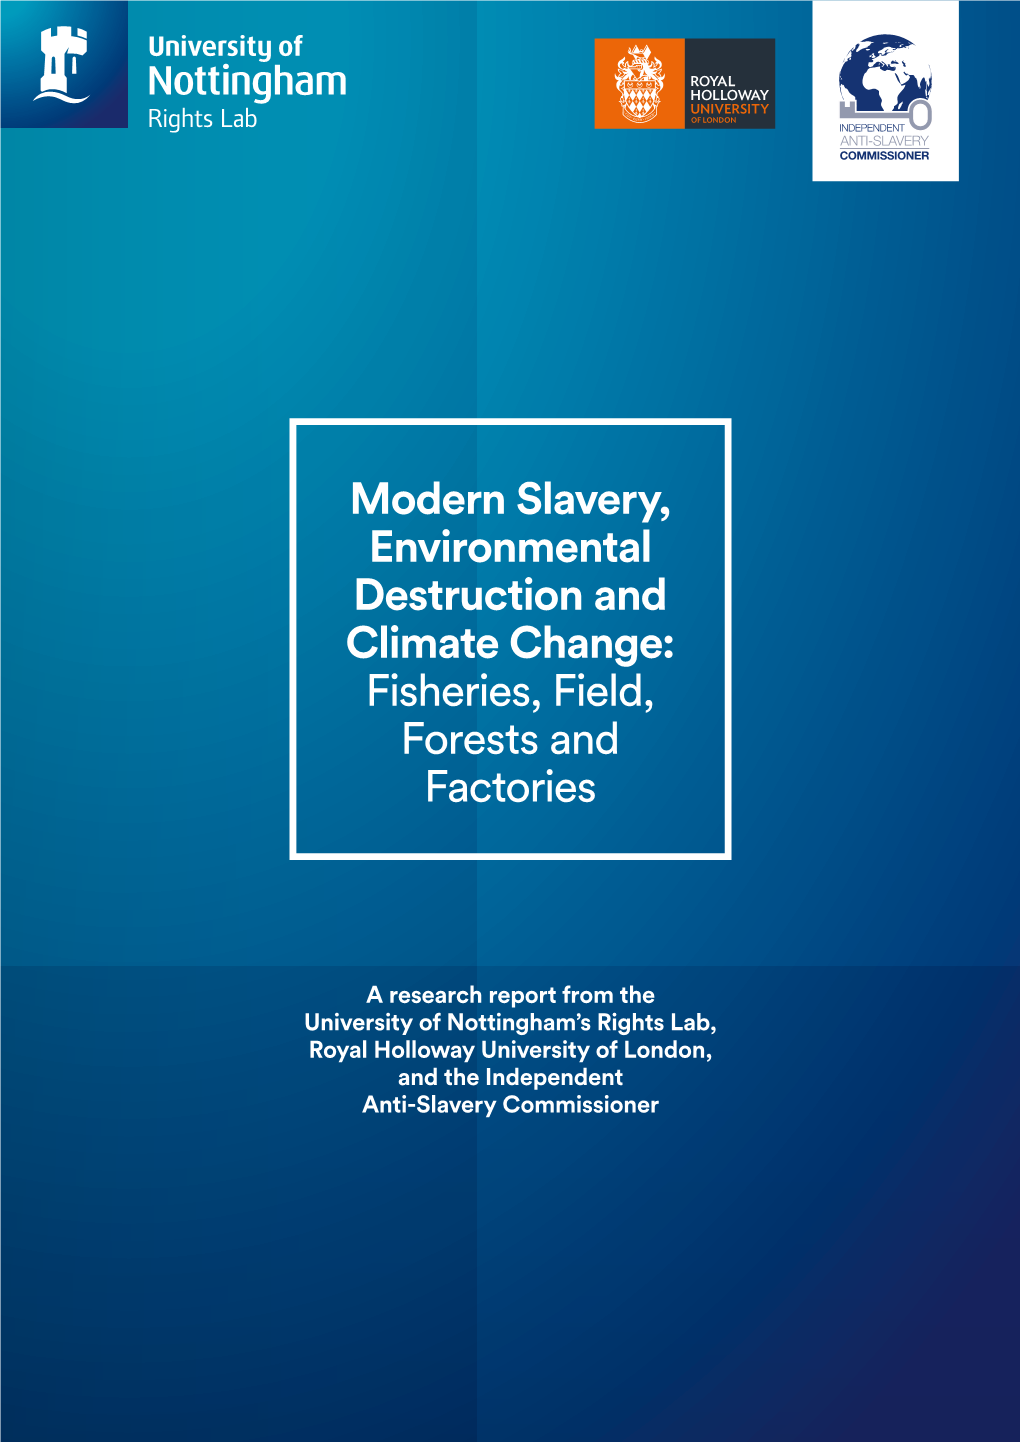 Modern Slavery, Environmental Destruction and Climate Change: Fisheries, Field, Forests and Factories